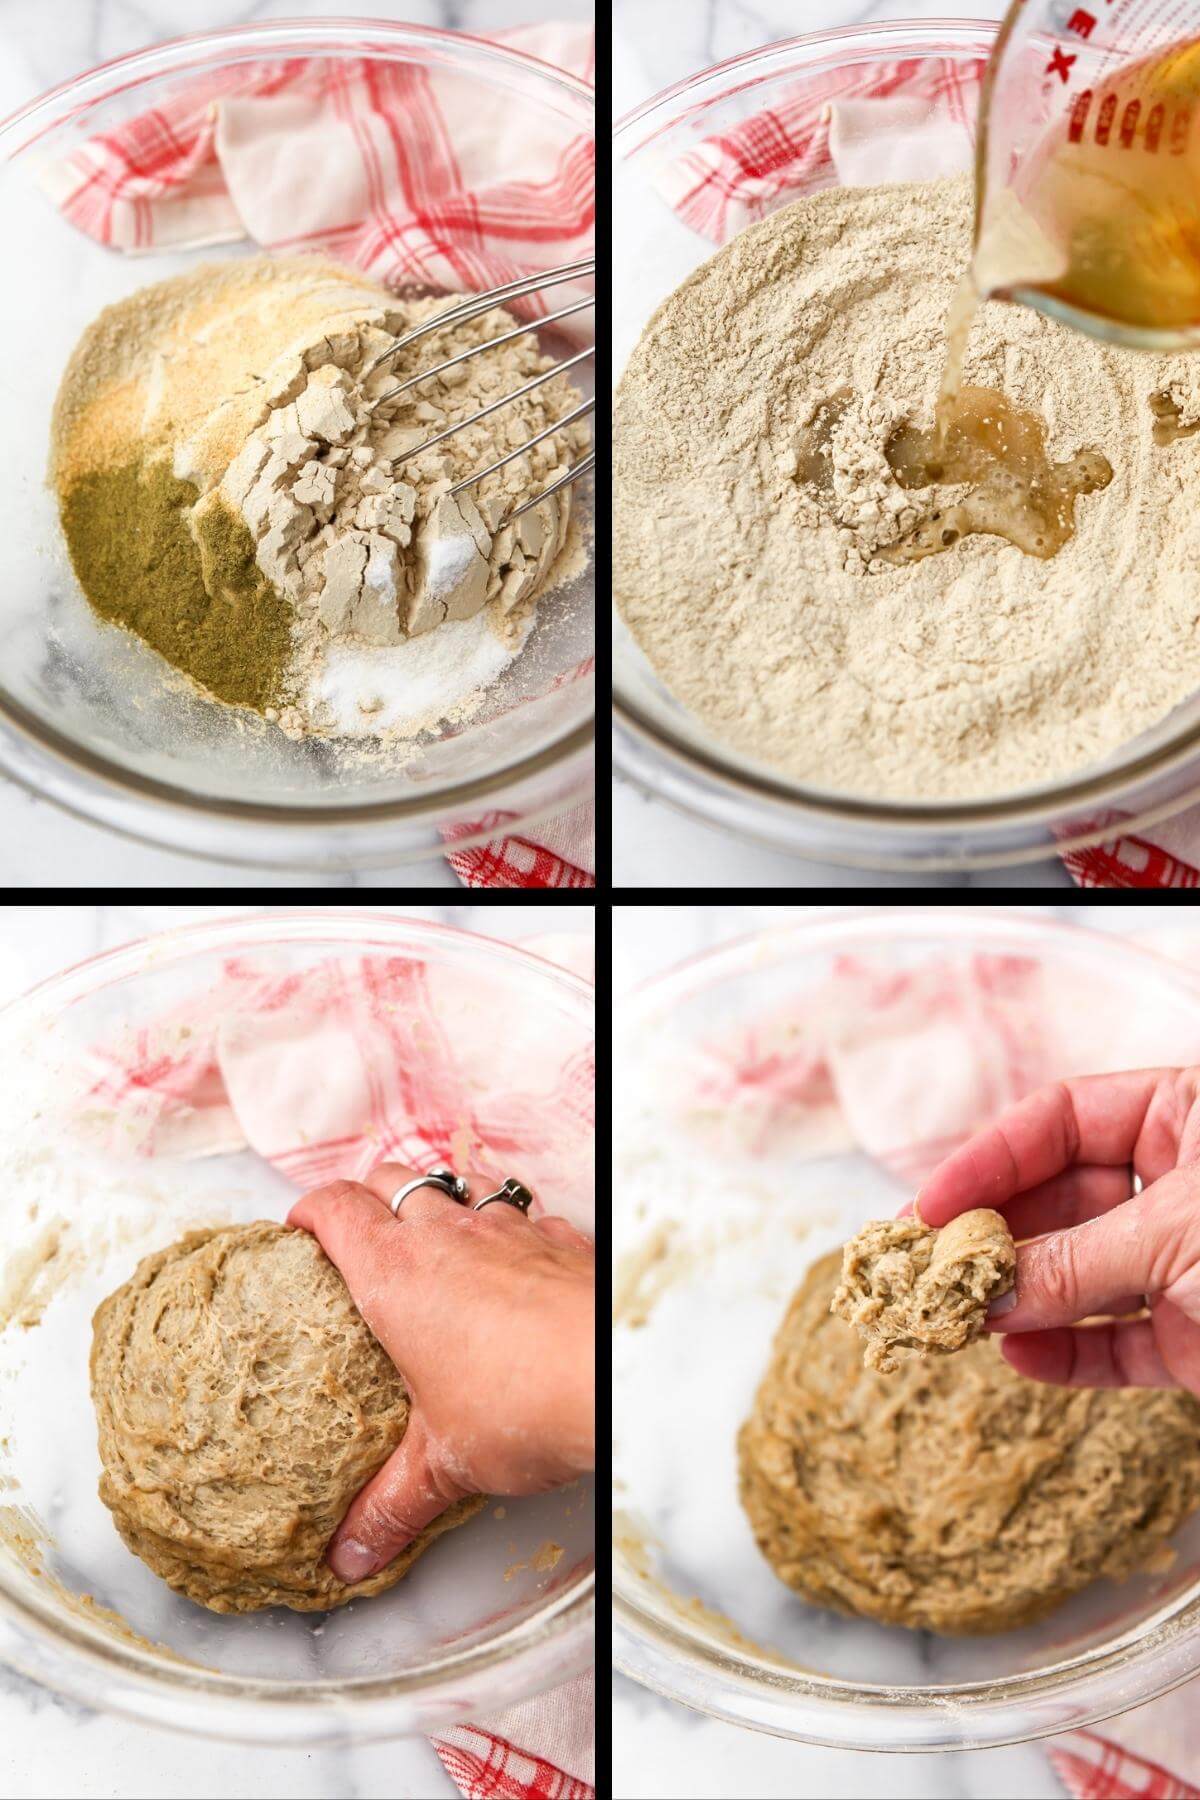 A collage of 4 images showing the process of making a simple easy seitan dough.